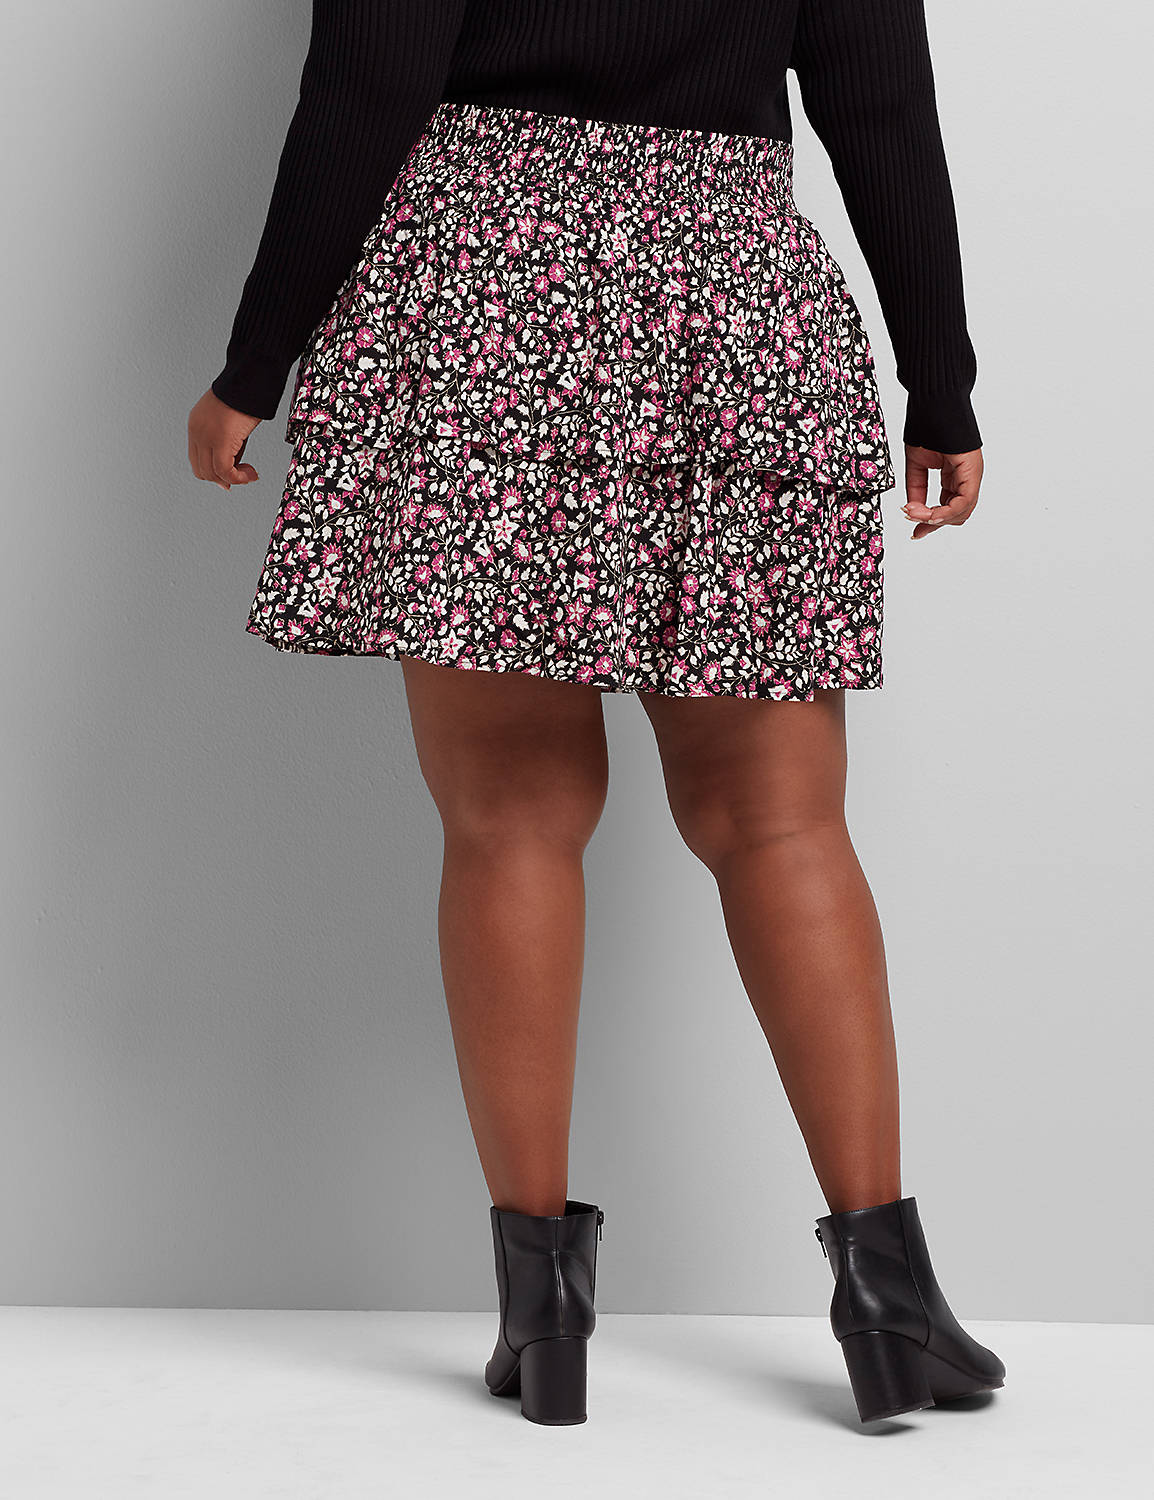 1112685 TIERED SHORT SKIRT-REUNITED:LBSU20344_VineyLinearFloral_colorway2:14/16 Product Image 2